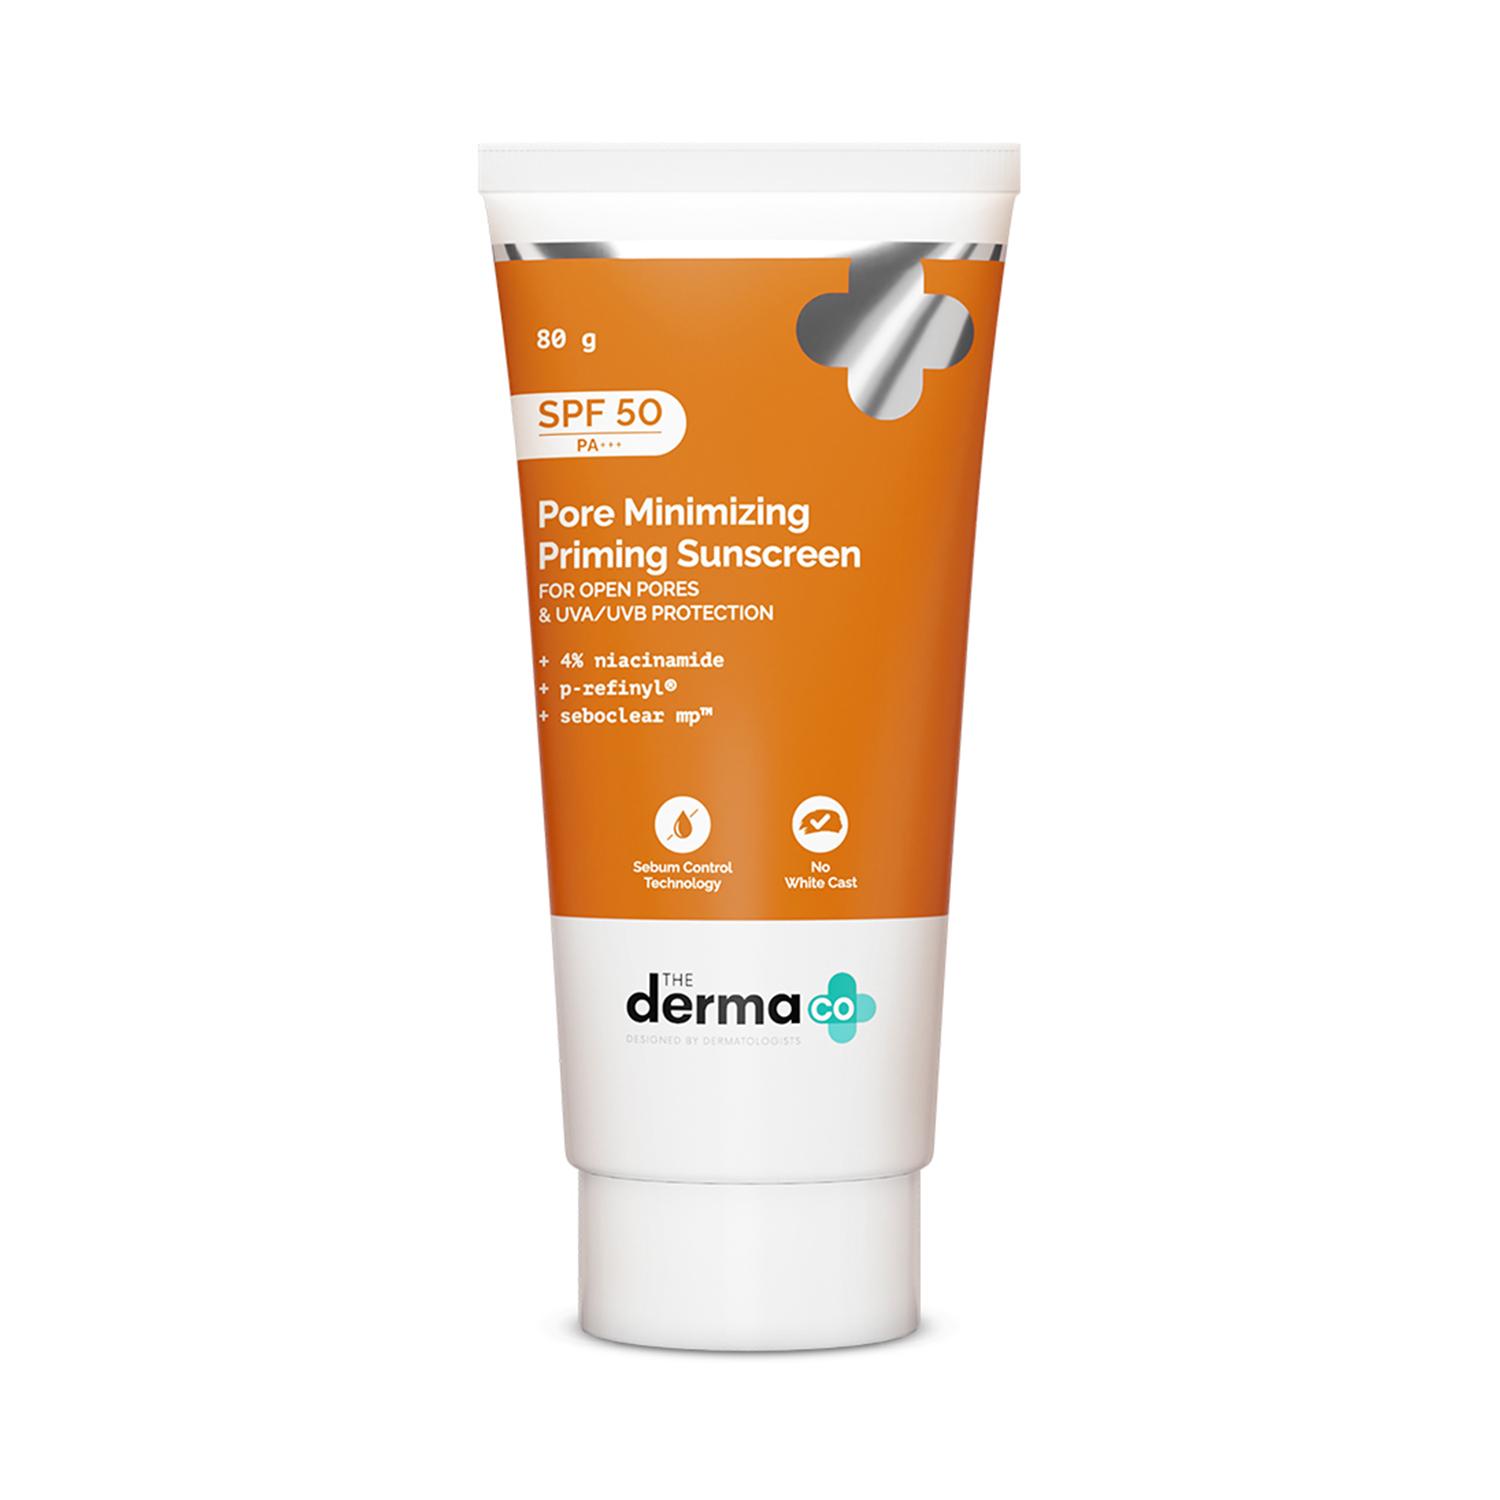 The Derma Co | The Derma Co Pore Minimizing Priming Sunscreen with SPF 50 & PA+++ For Open Pores  (80 g)